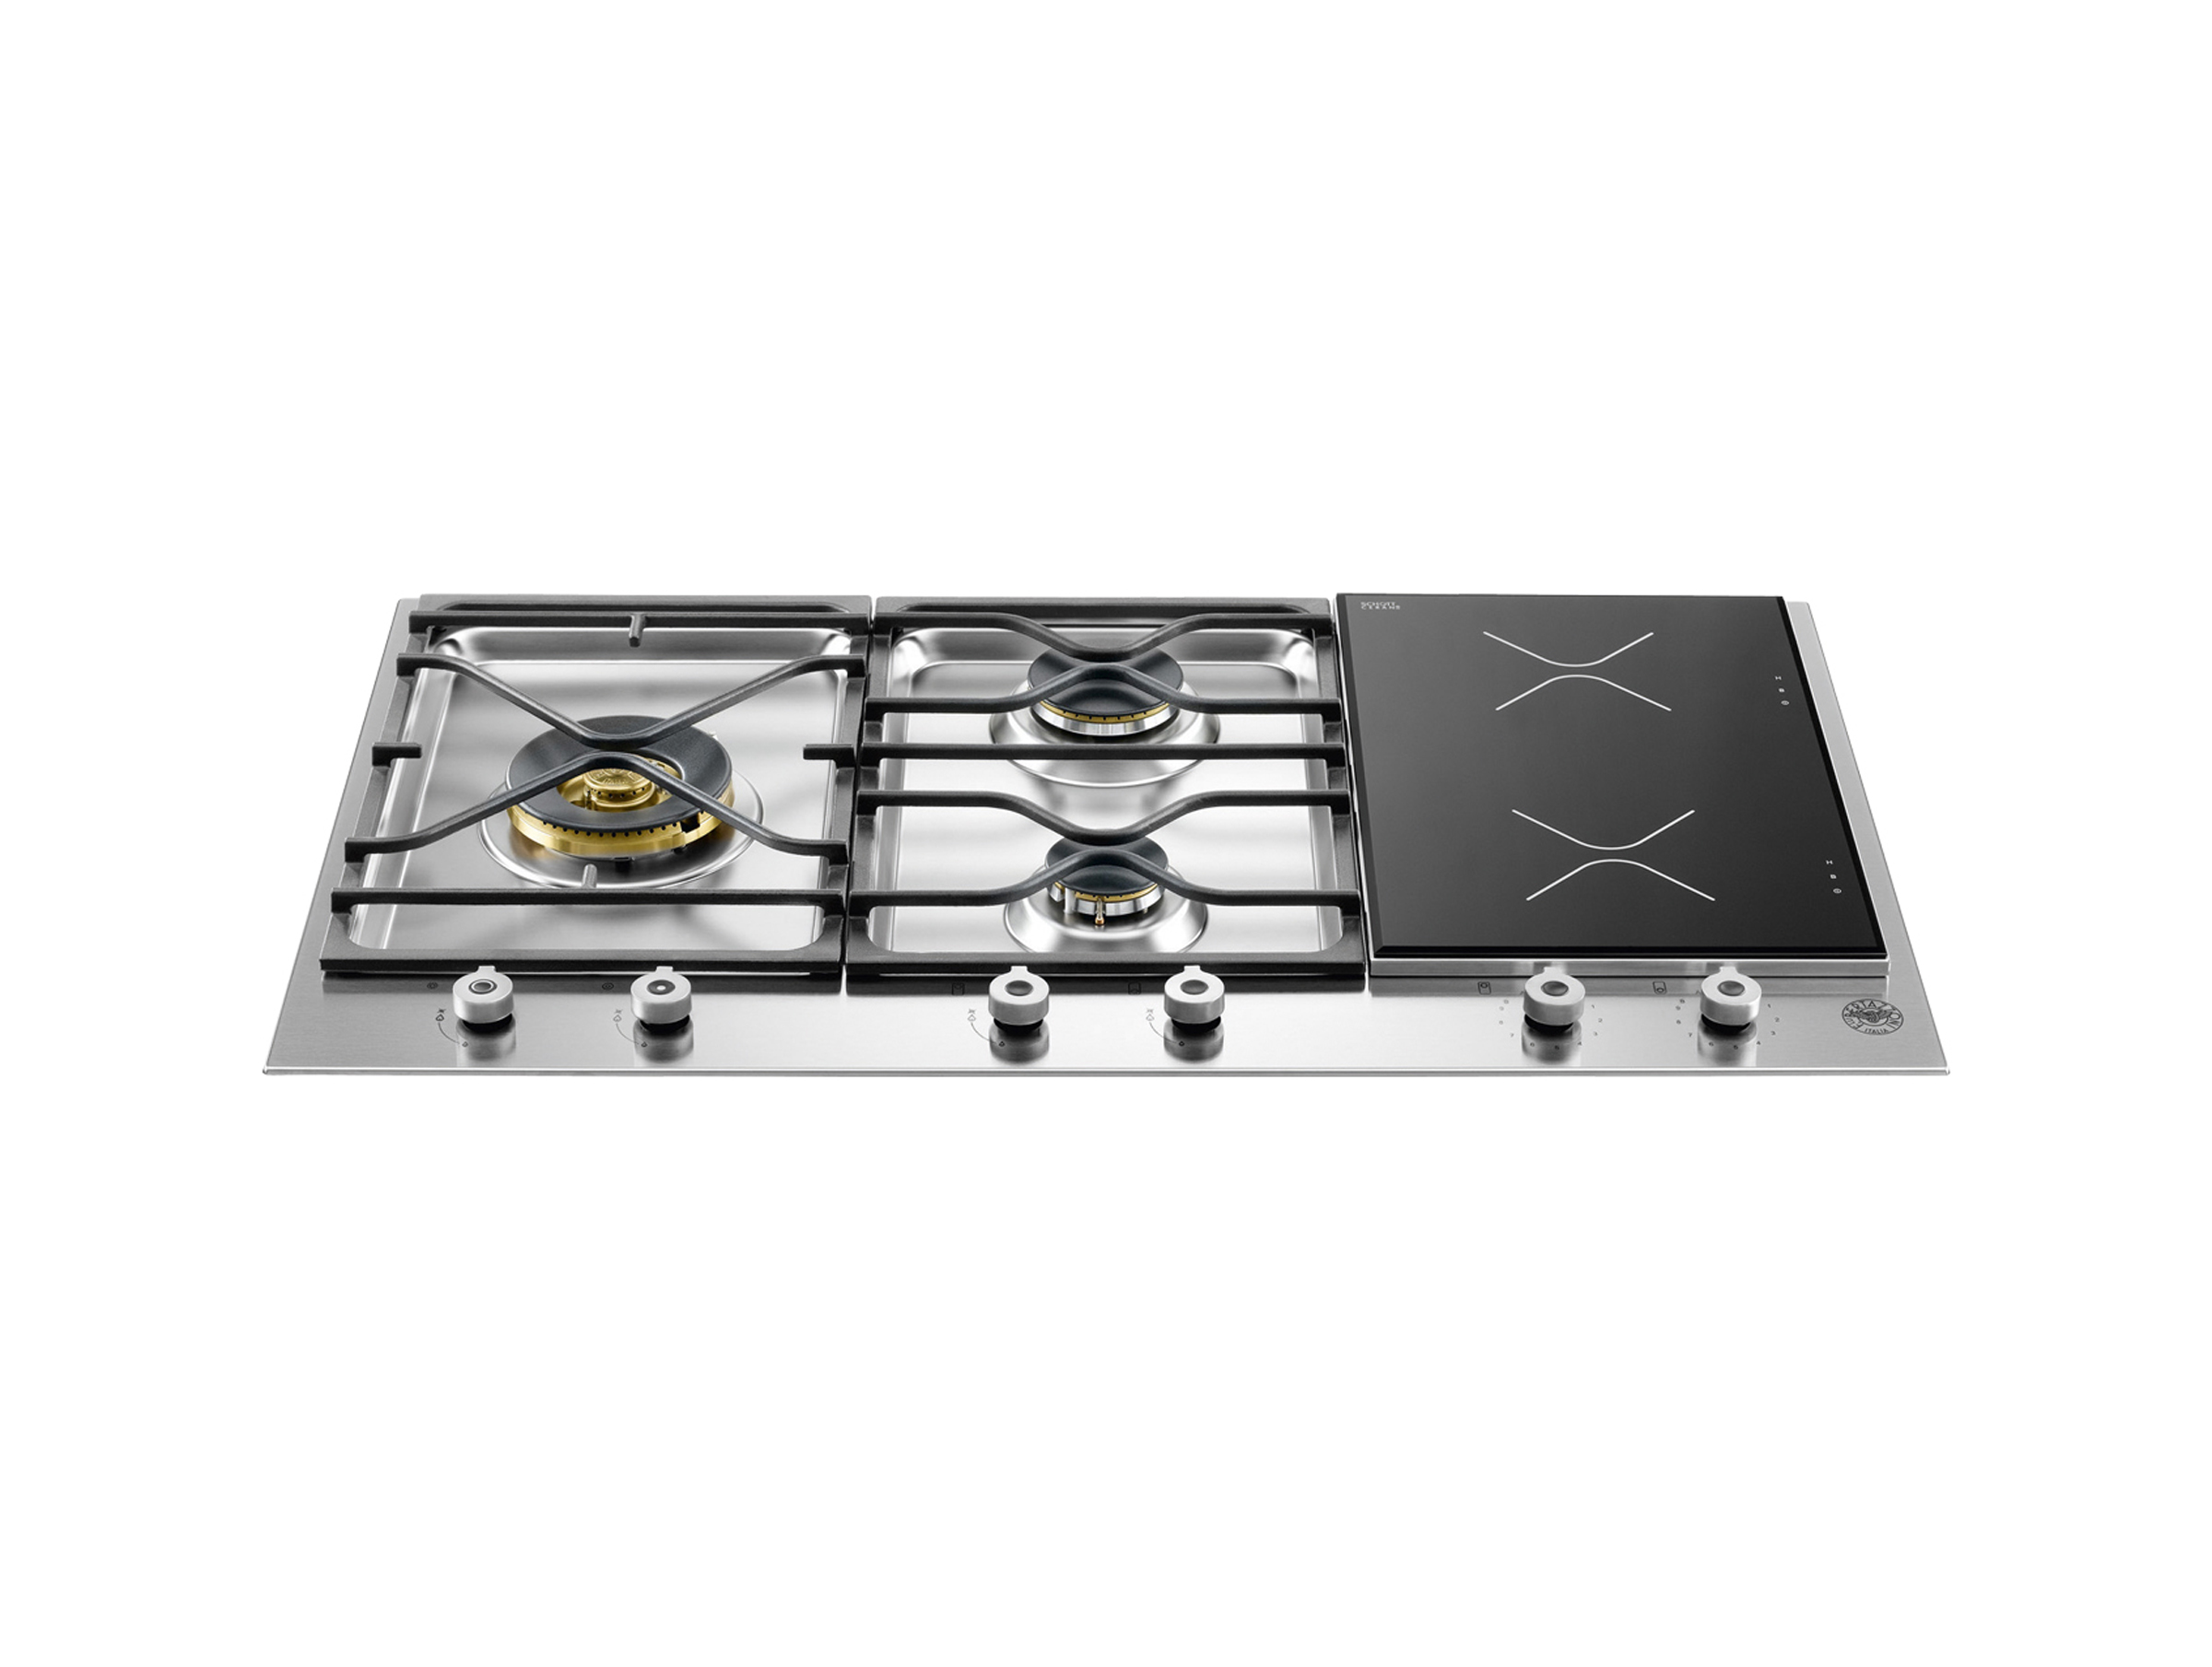 Stainless Steel Induction Gas Range 36 segmented cooktop 3 burner and 2 induction zones bertazzoni stainless steel